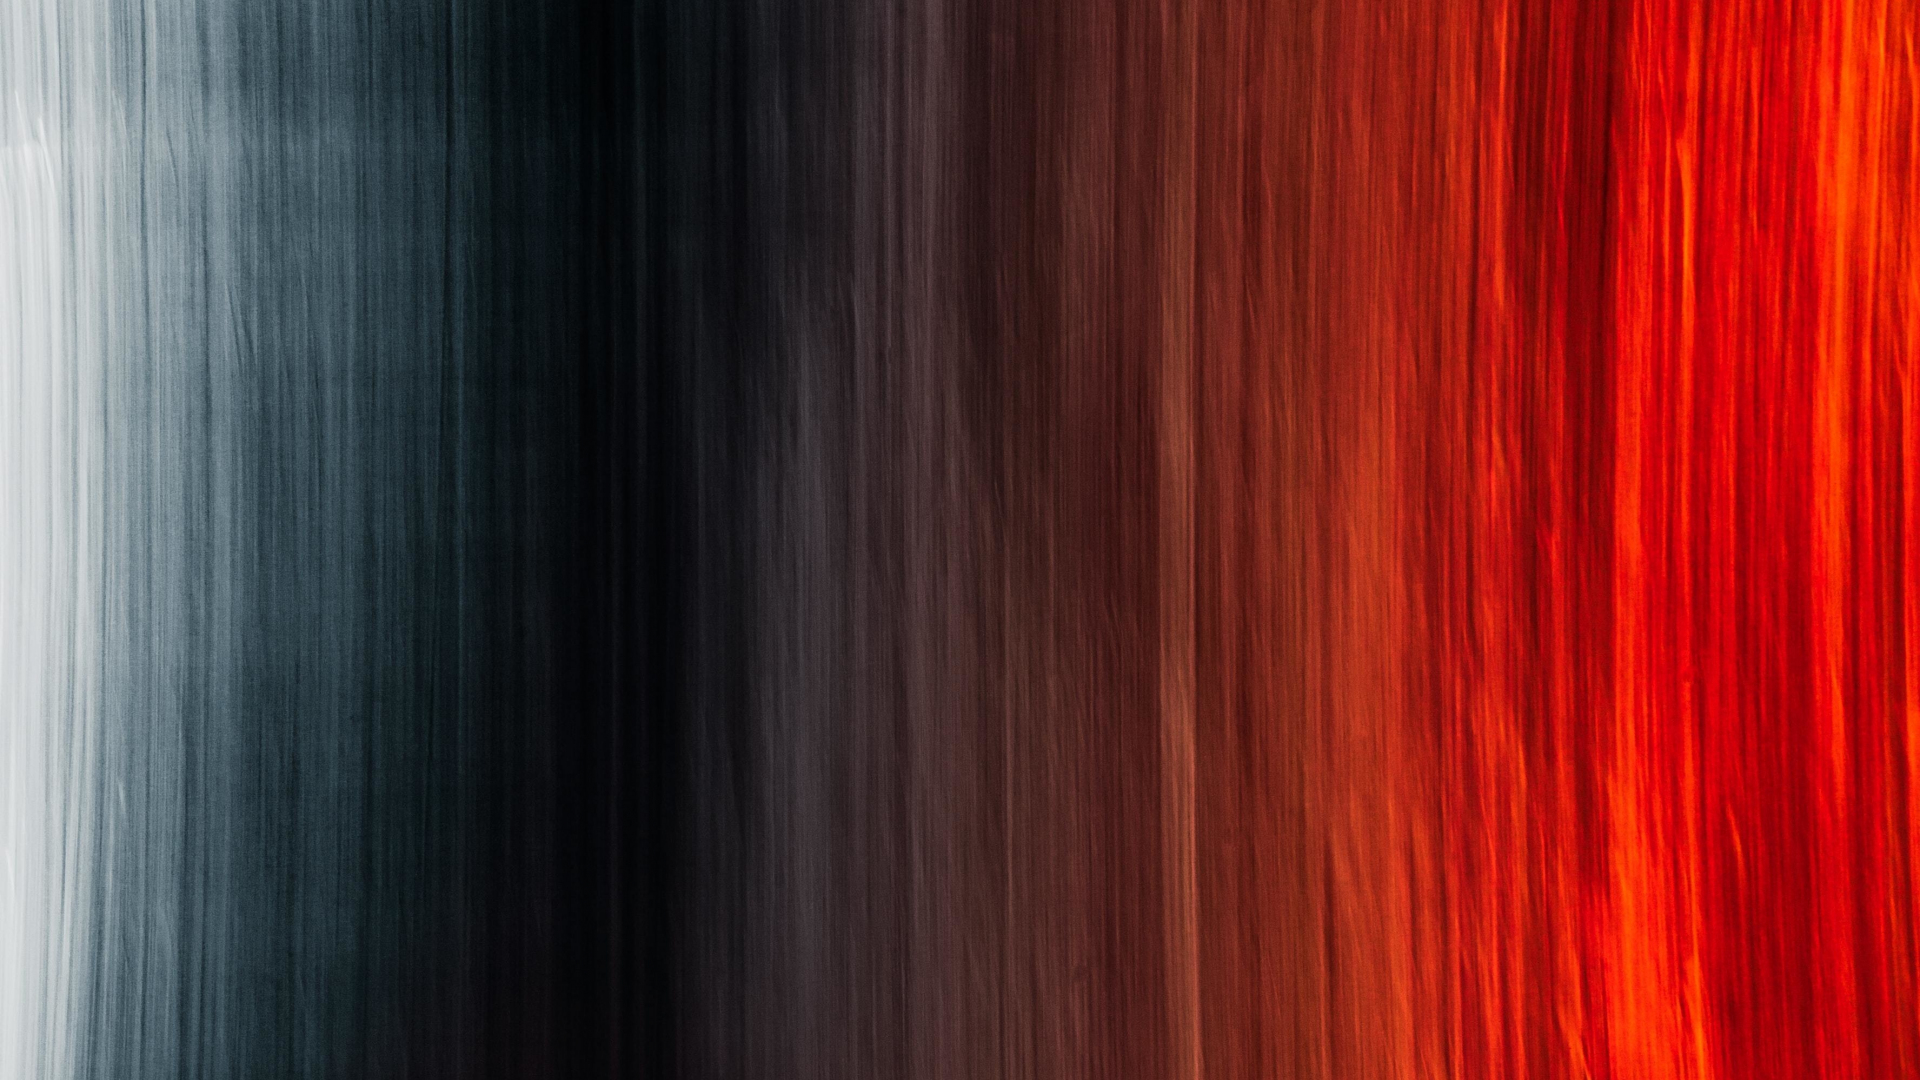 Download 1920x1080 wallpaper threads, black-red, abstract art, full hd